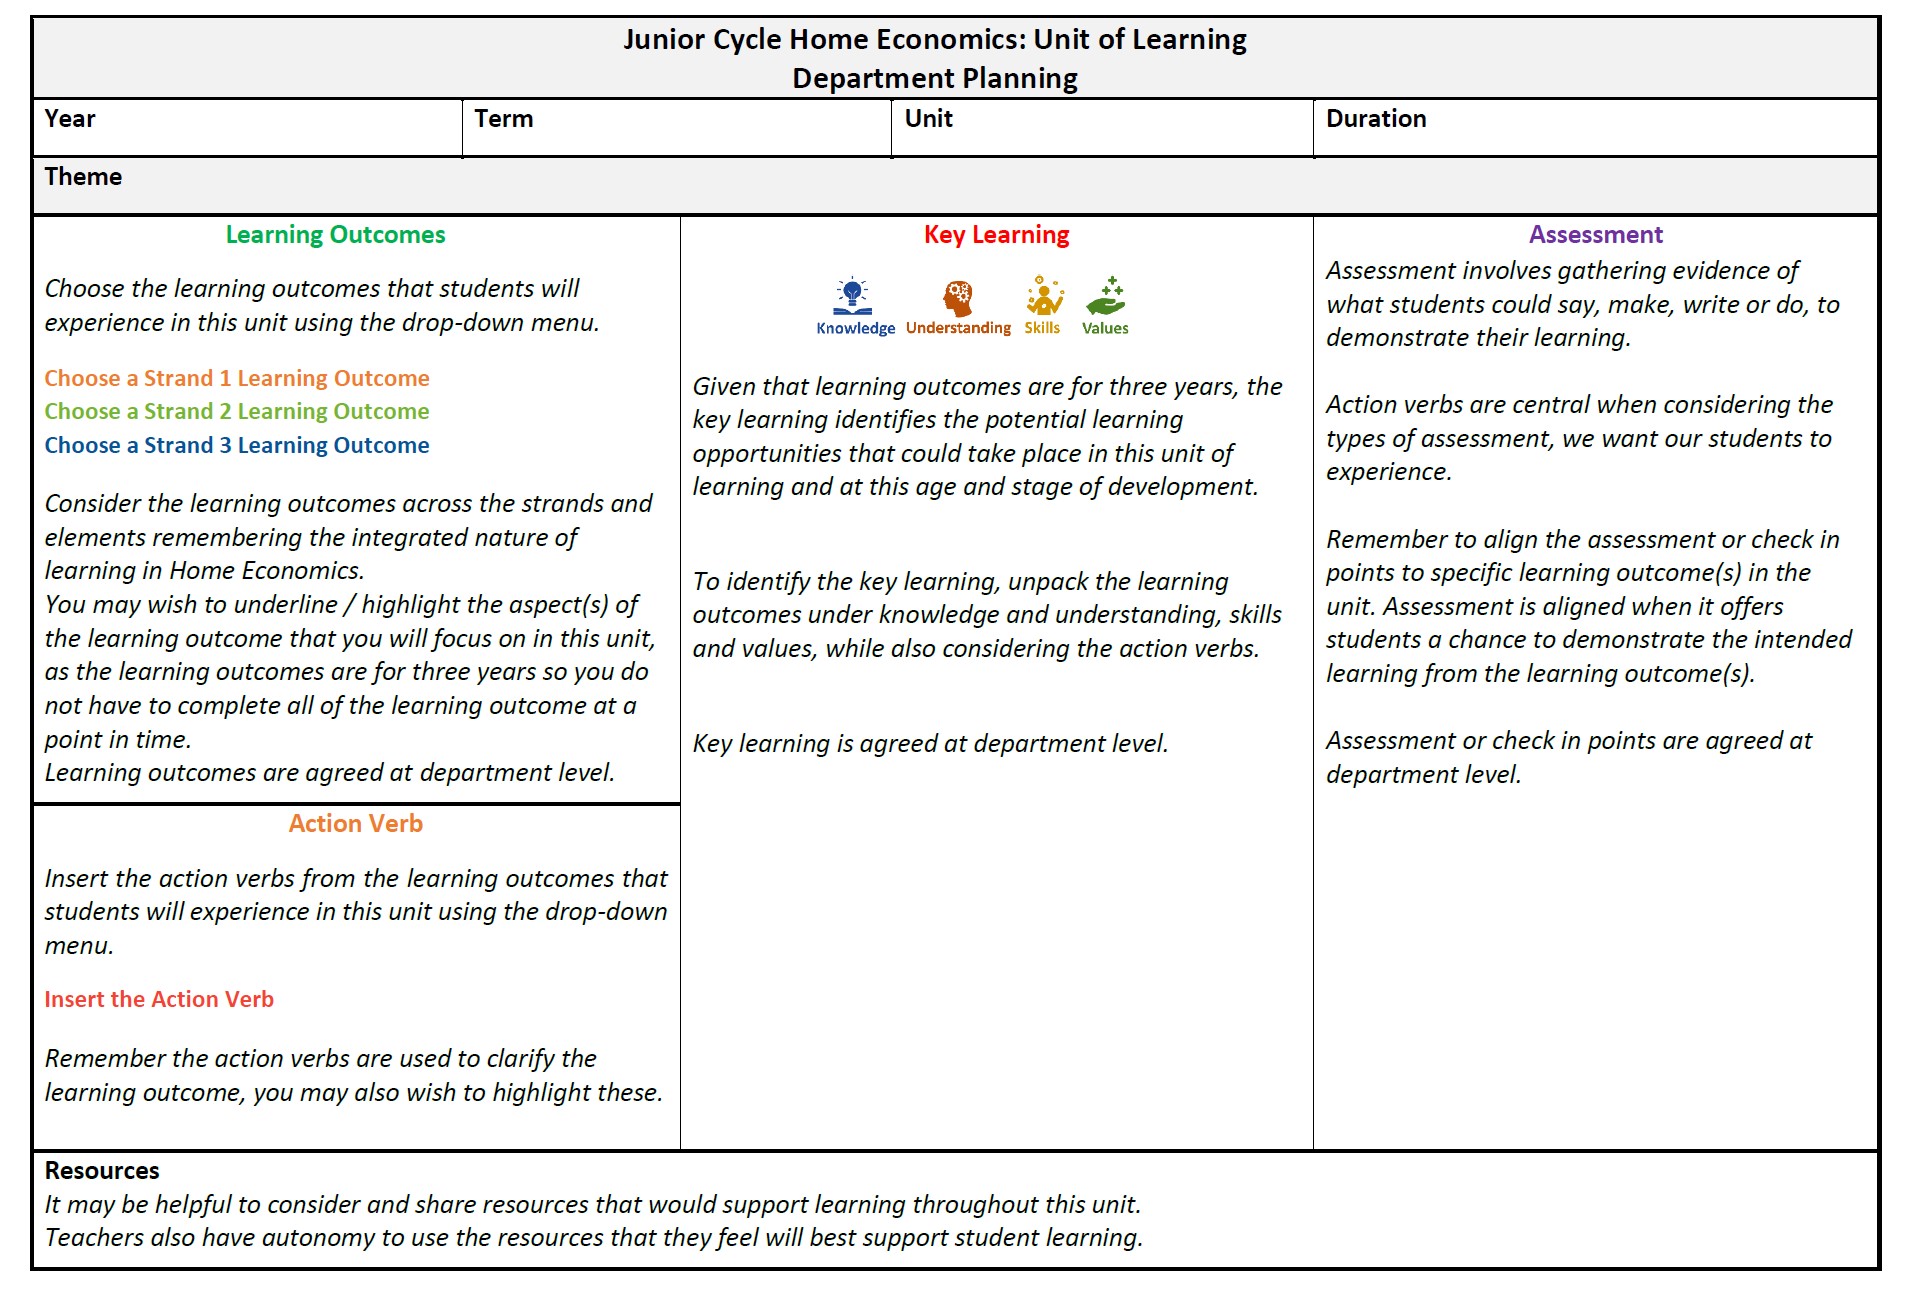 Home Economics Interactive Unit of Learning Planning Template (Landscape Version)